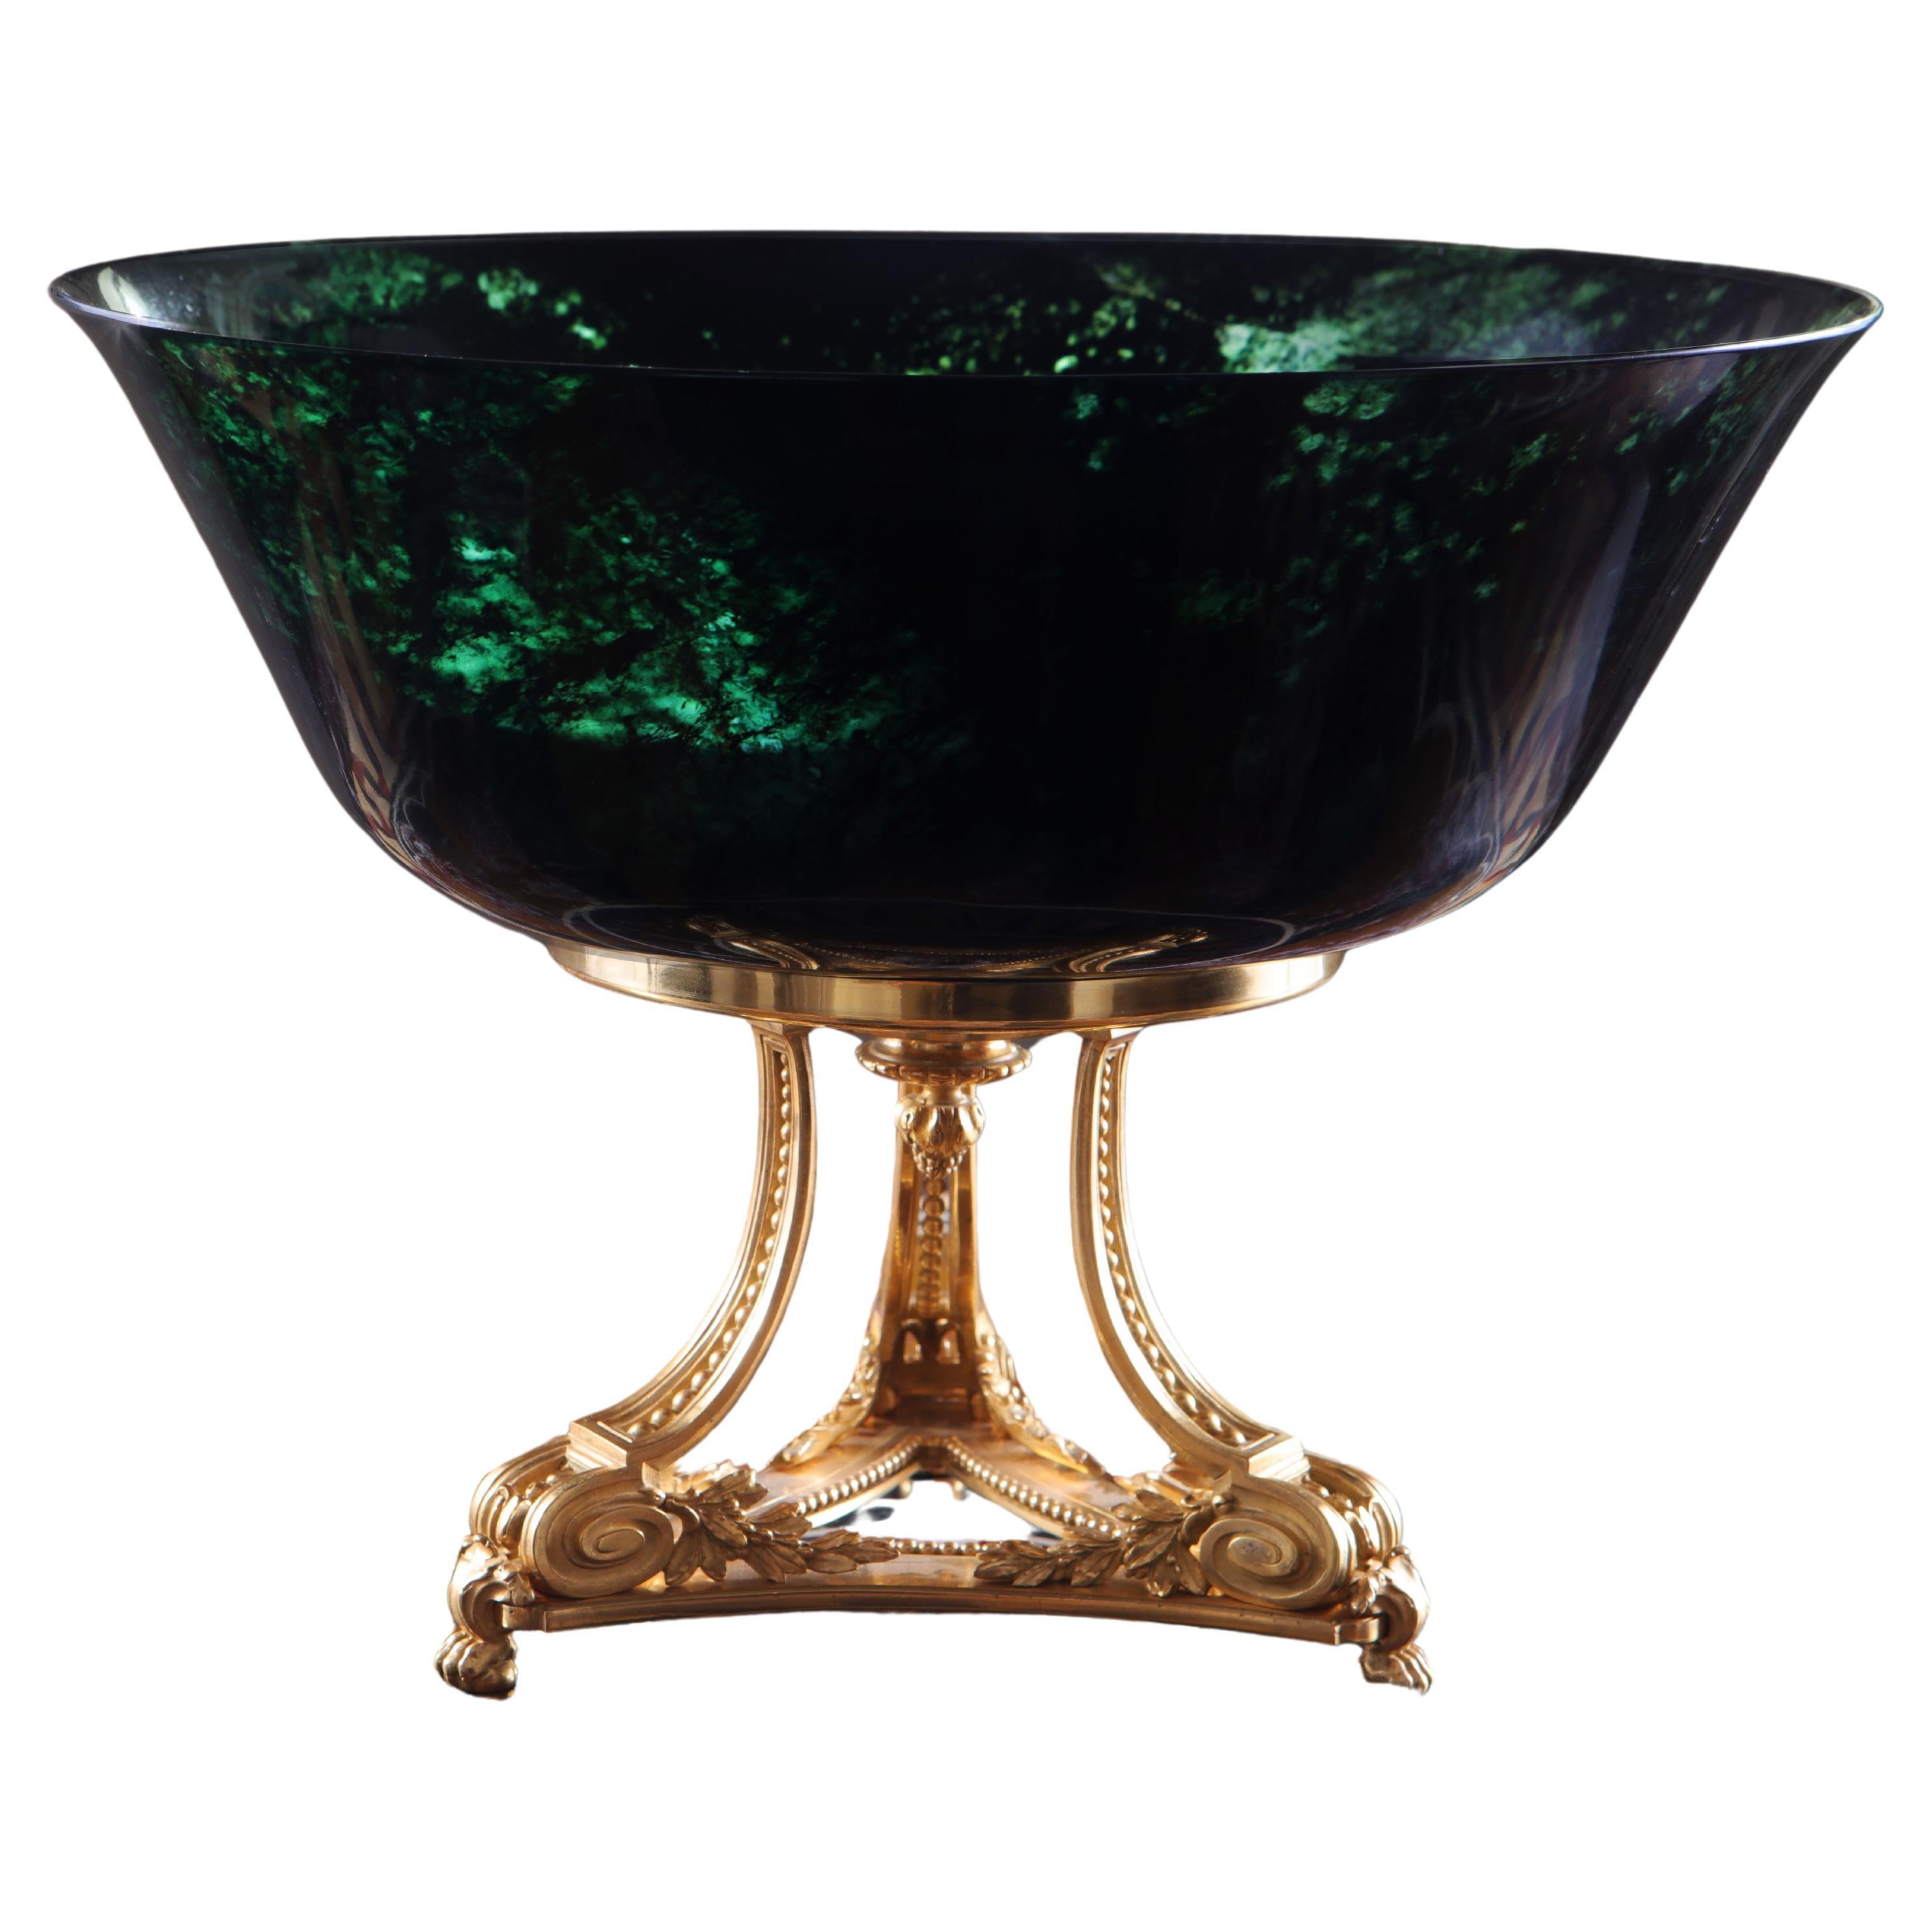 Large Spinach Bowl On Gilt Bronze Stand